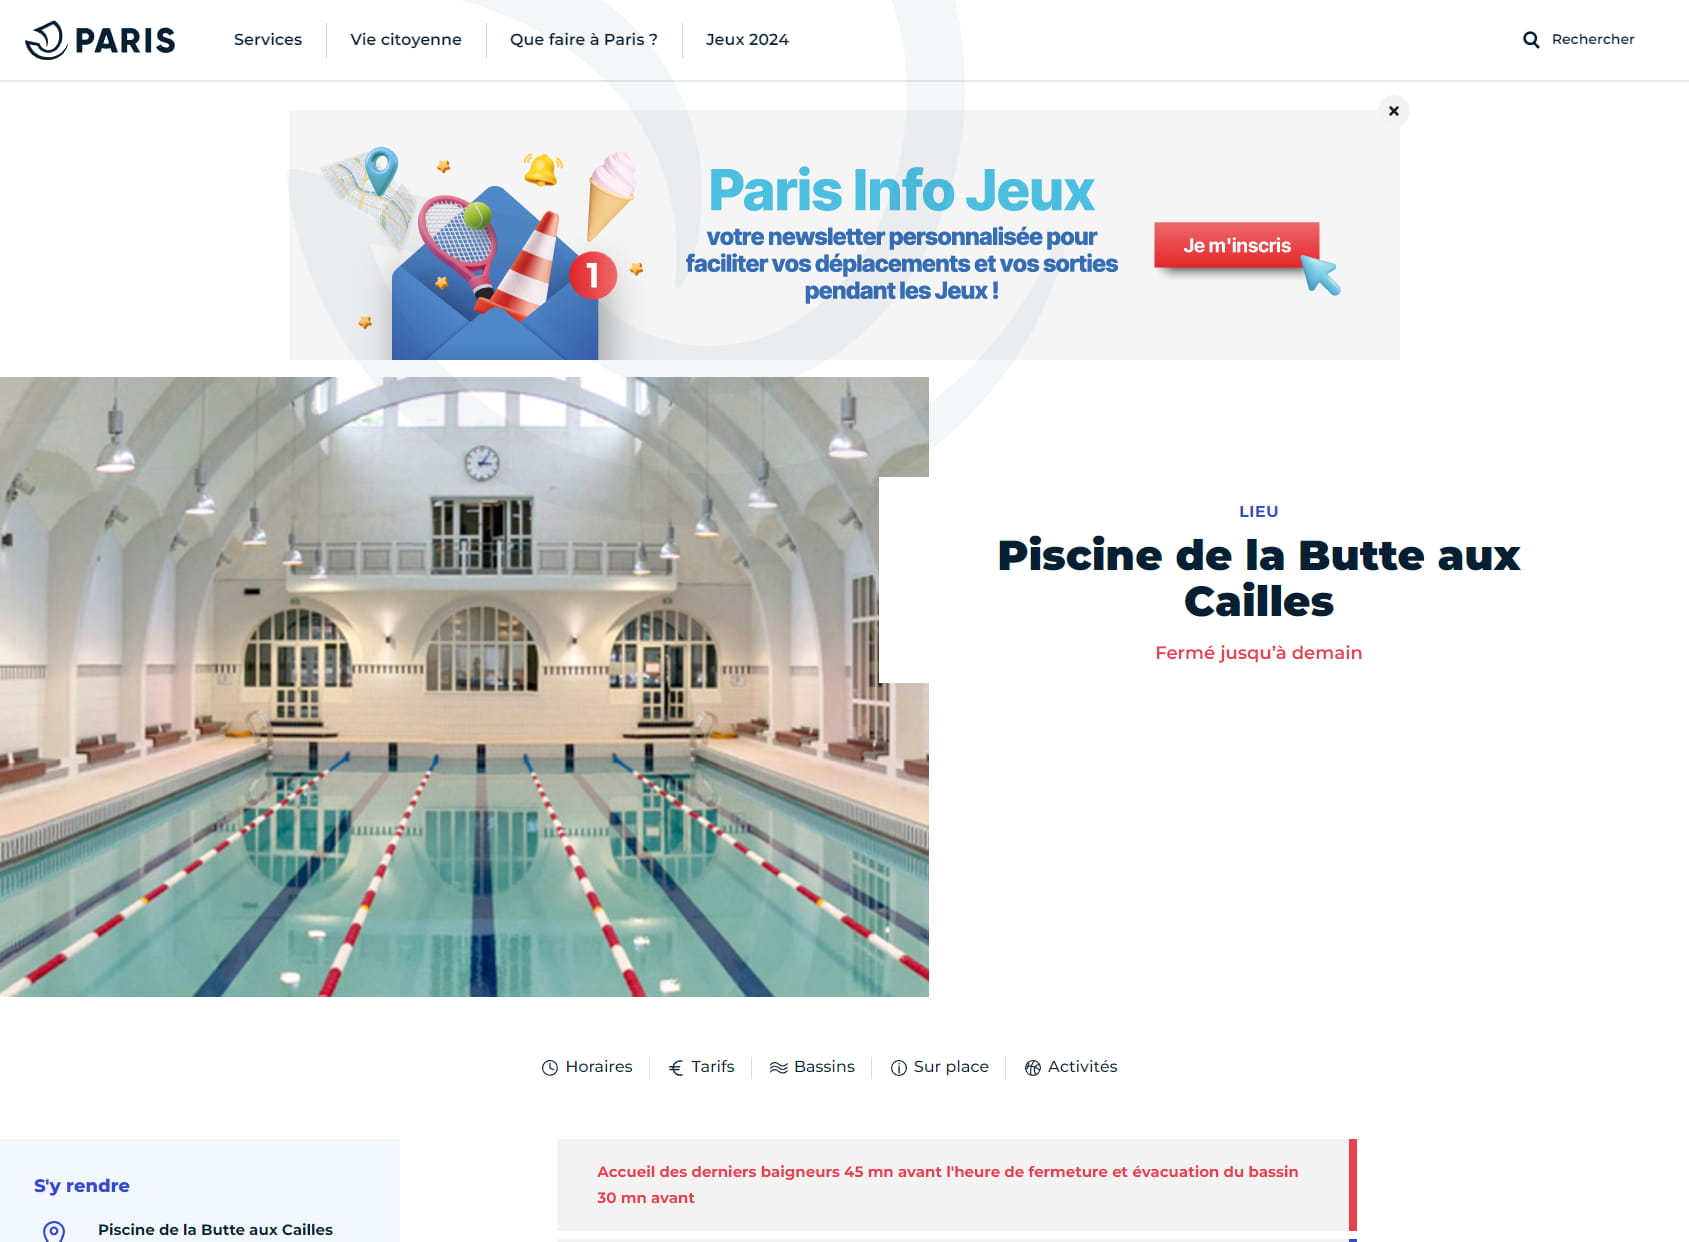 Butte-aux-Cailles Swimming Pool